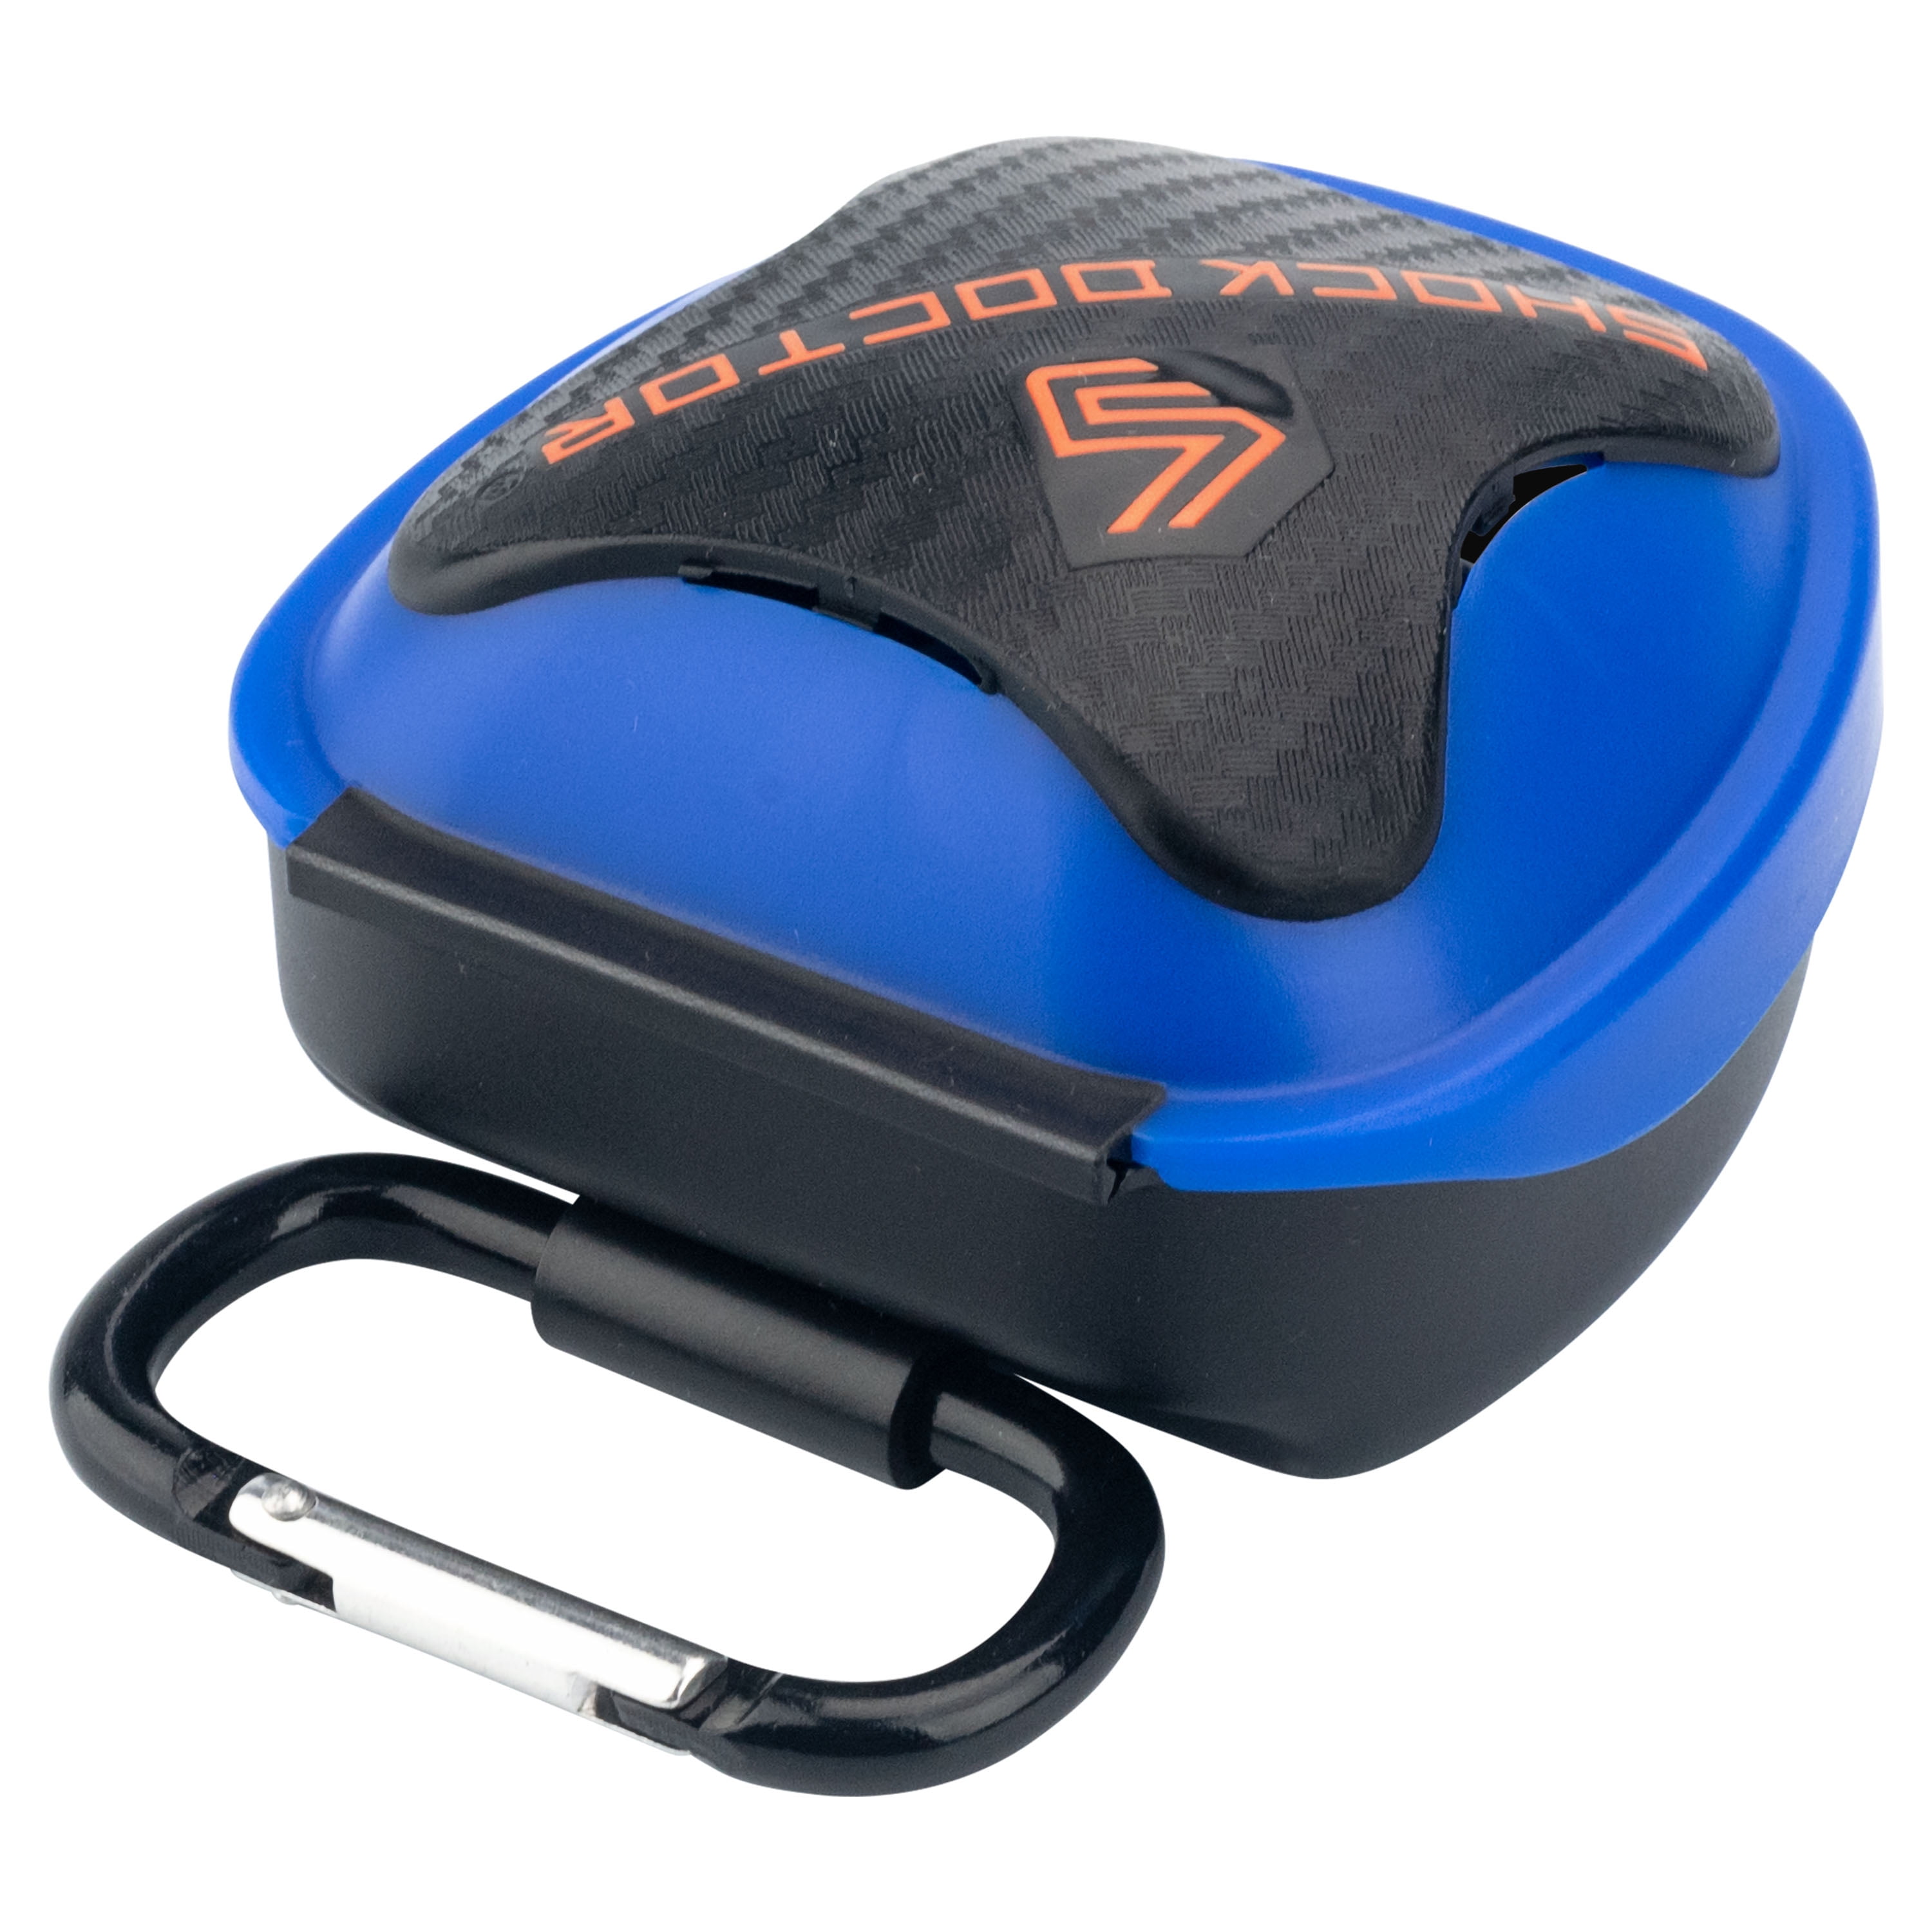 Buy Anti-Microbial Mouthguard Case from Shock Doctor